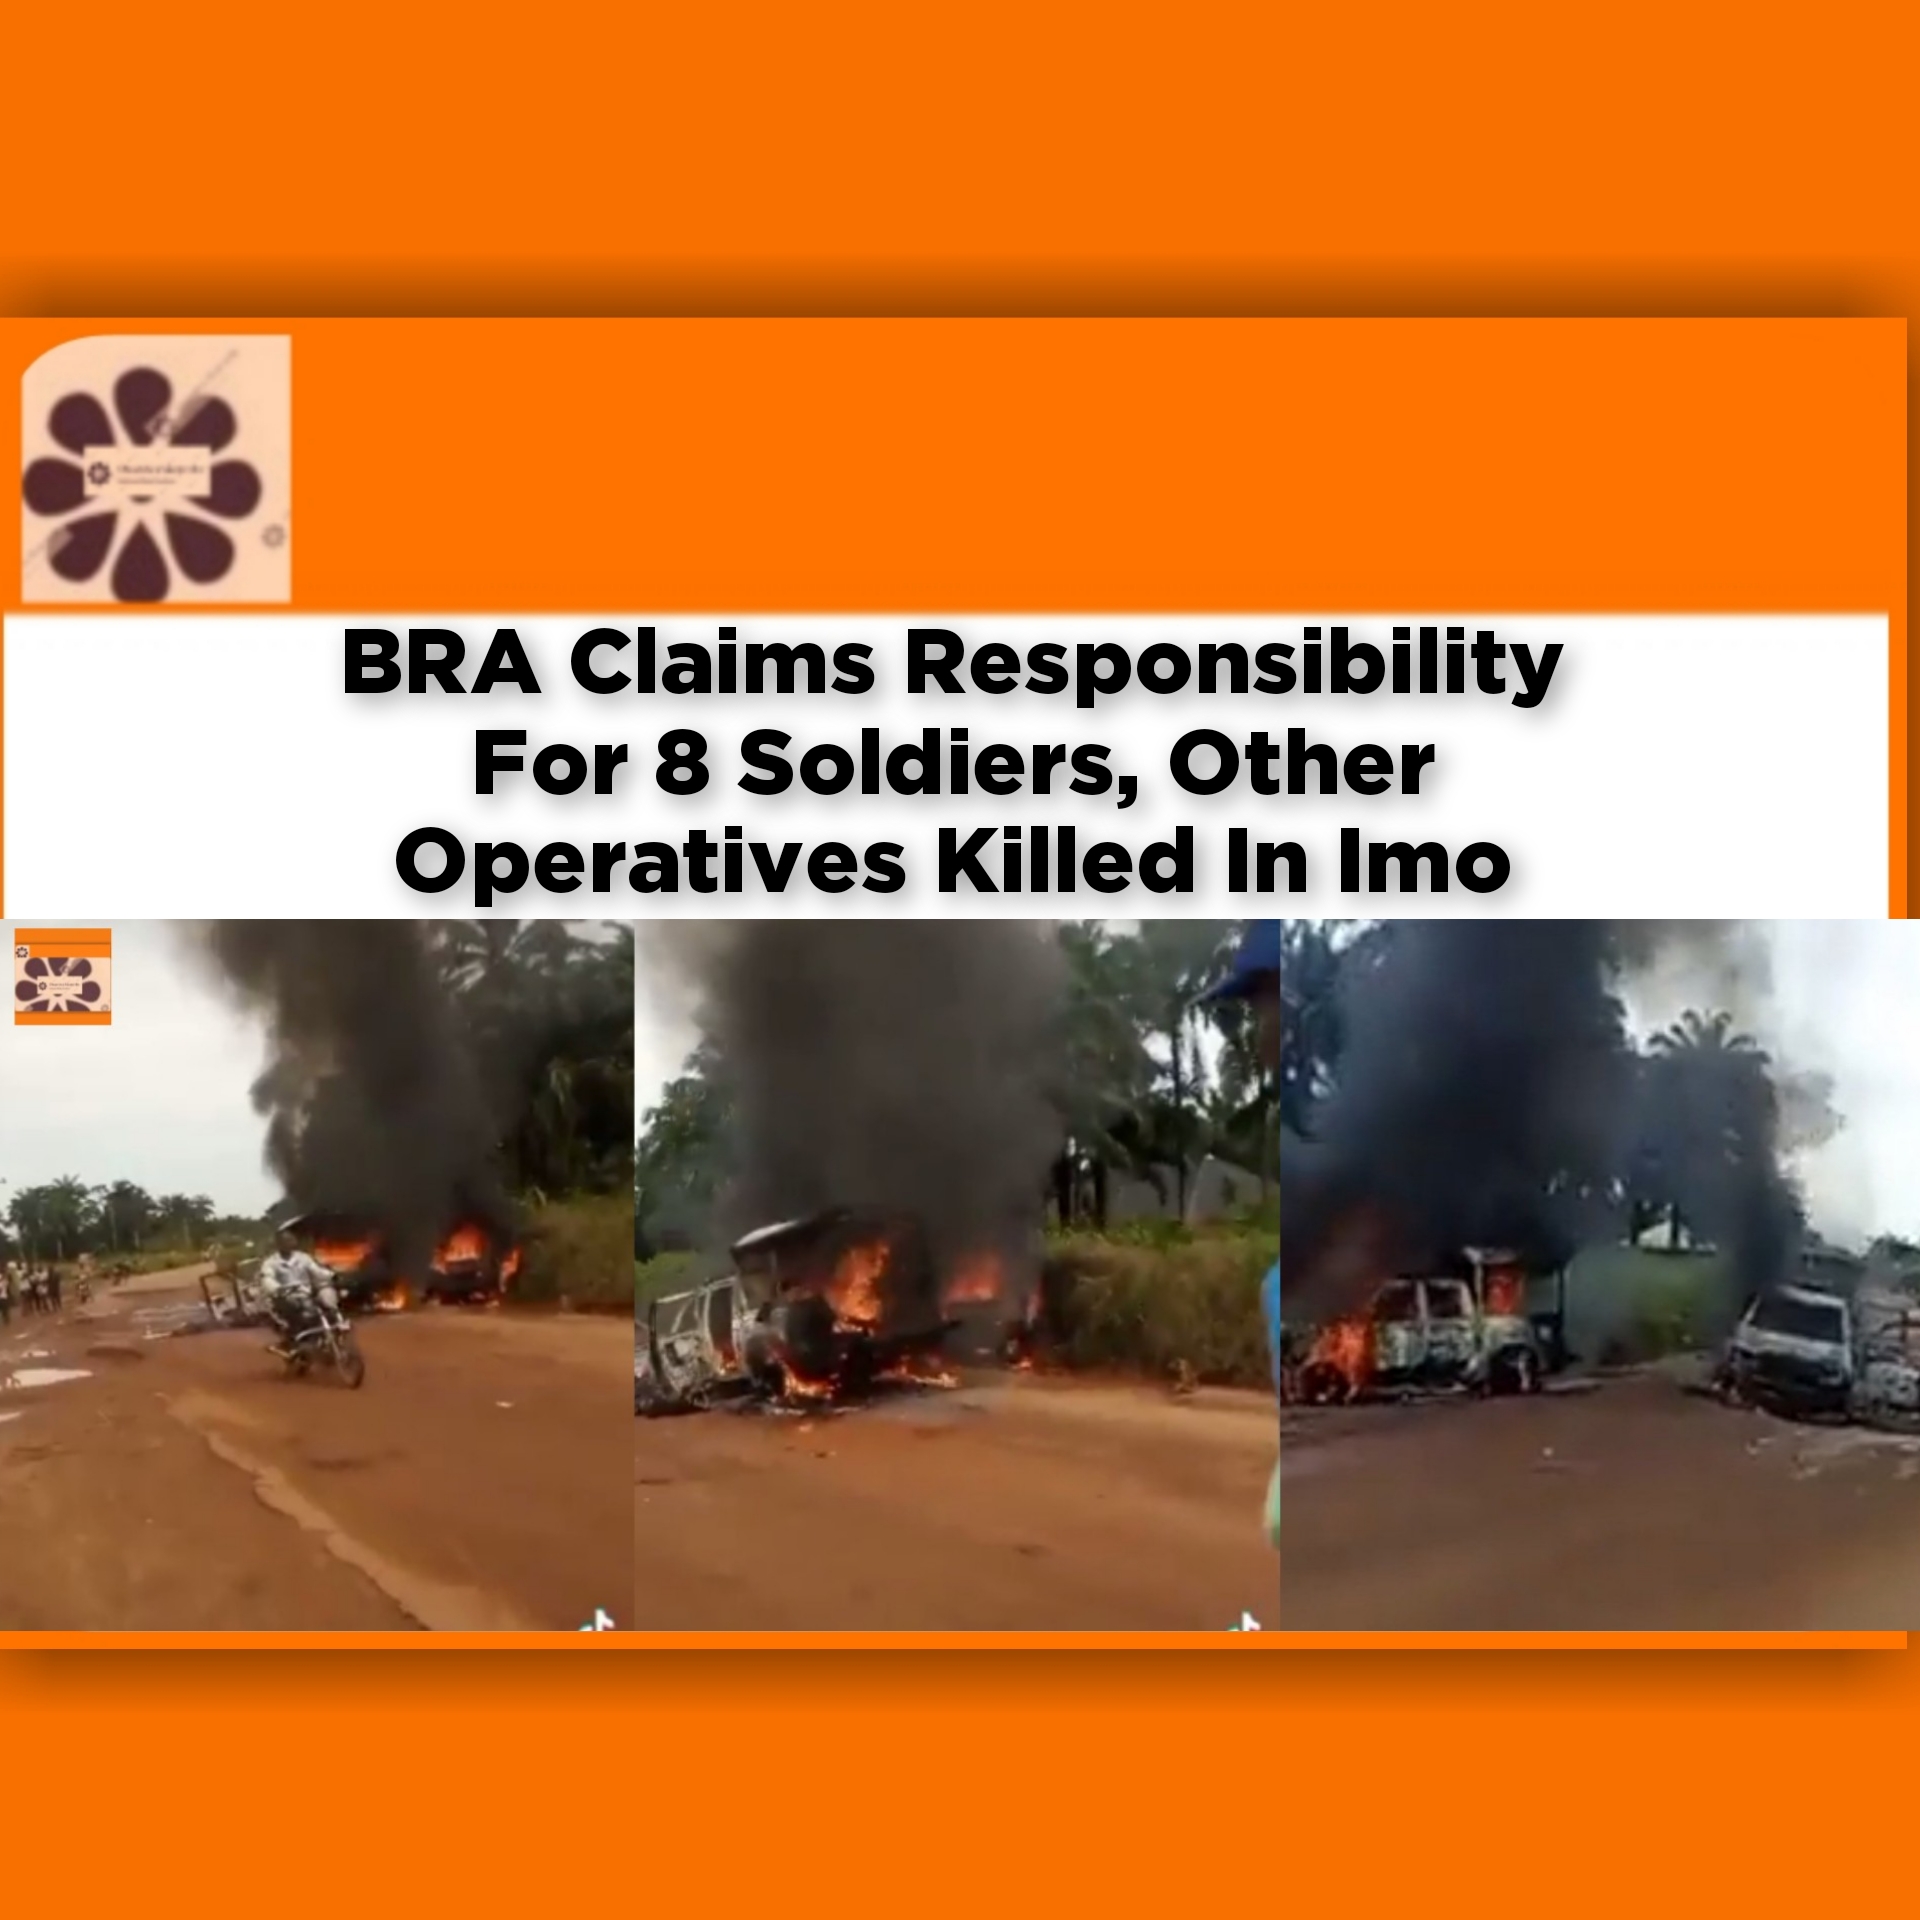 BRA Claims Responsibility For 8 Soldiers, Other Operatives Killed In Imo ~ OsazuwaAkonedo #politics